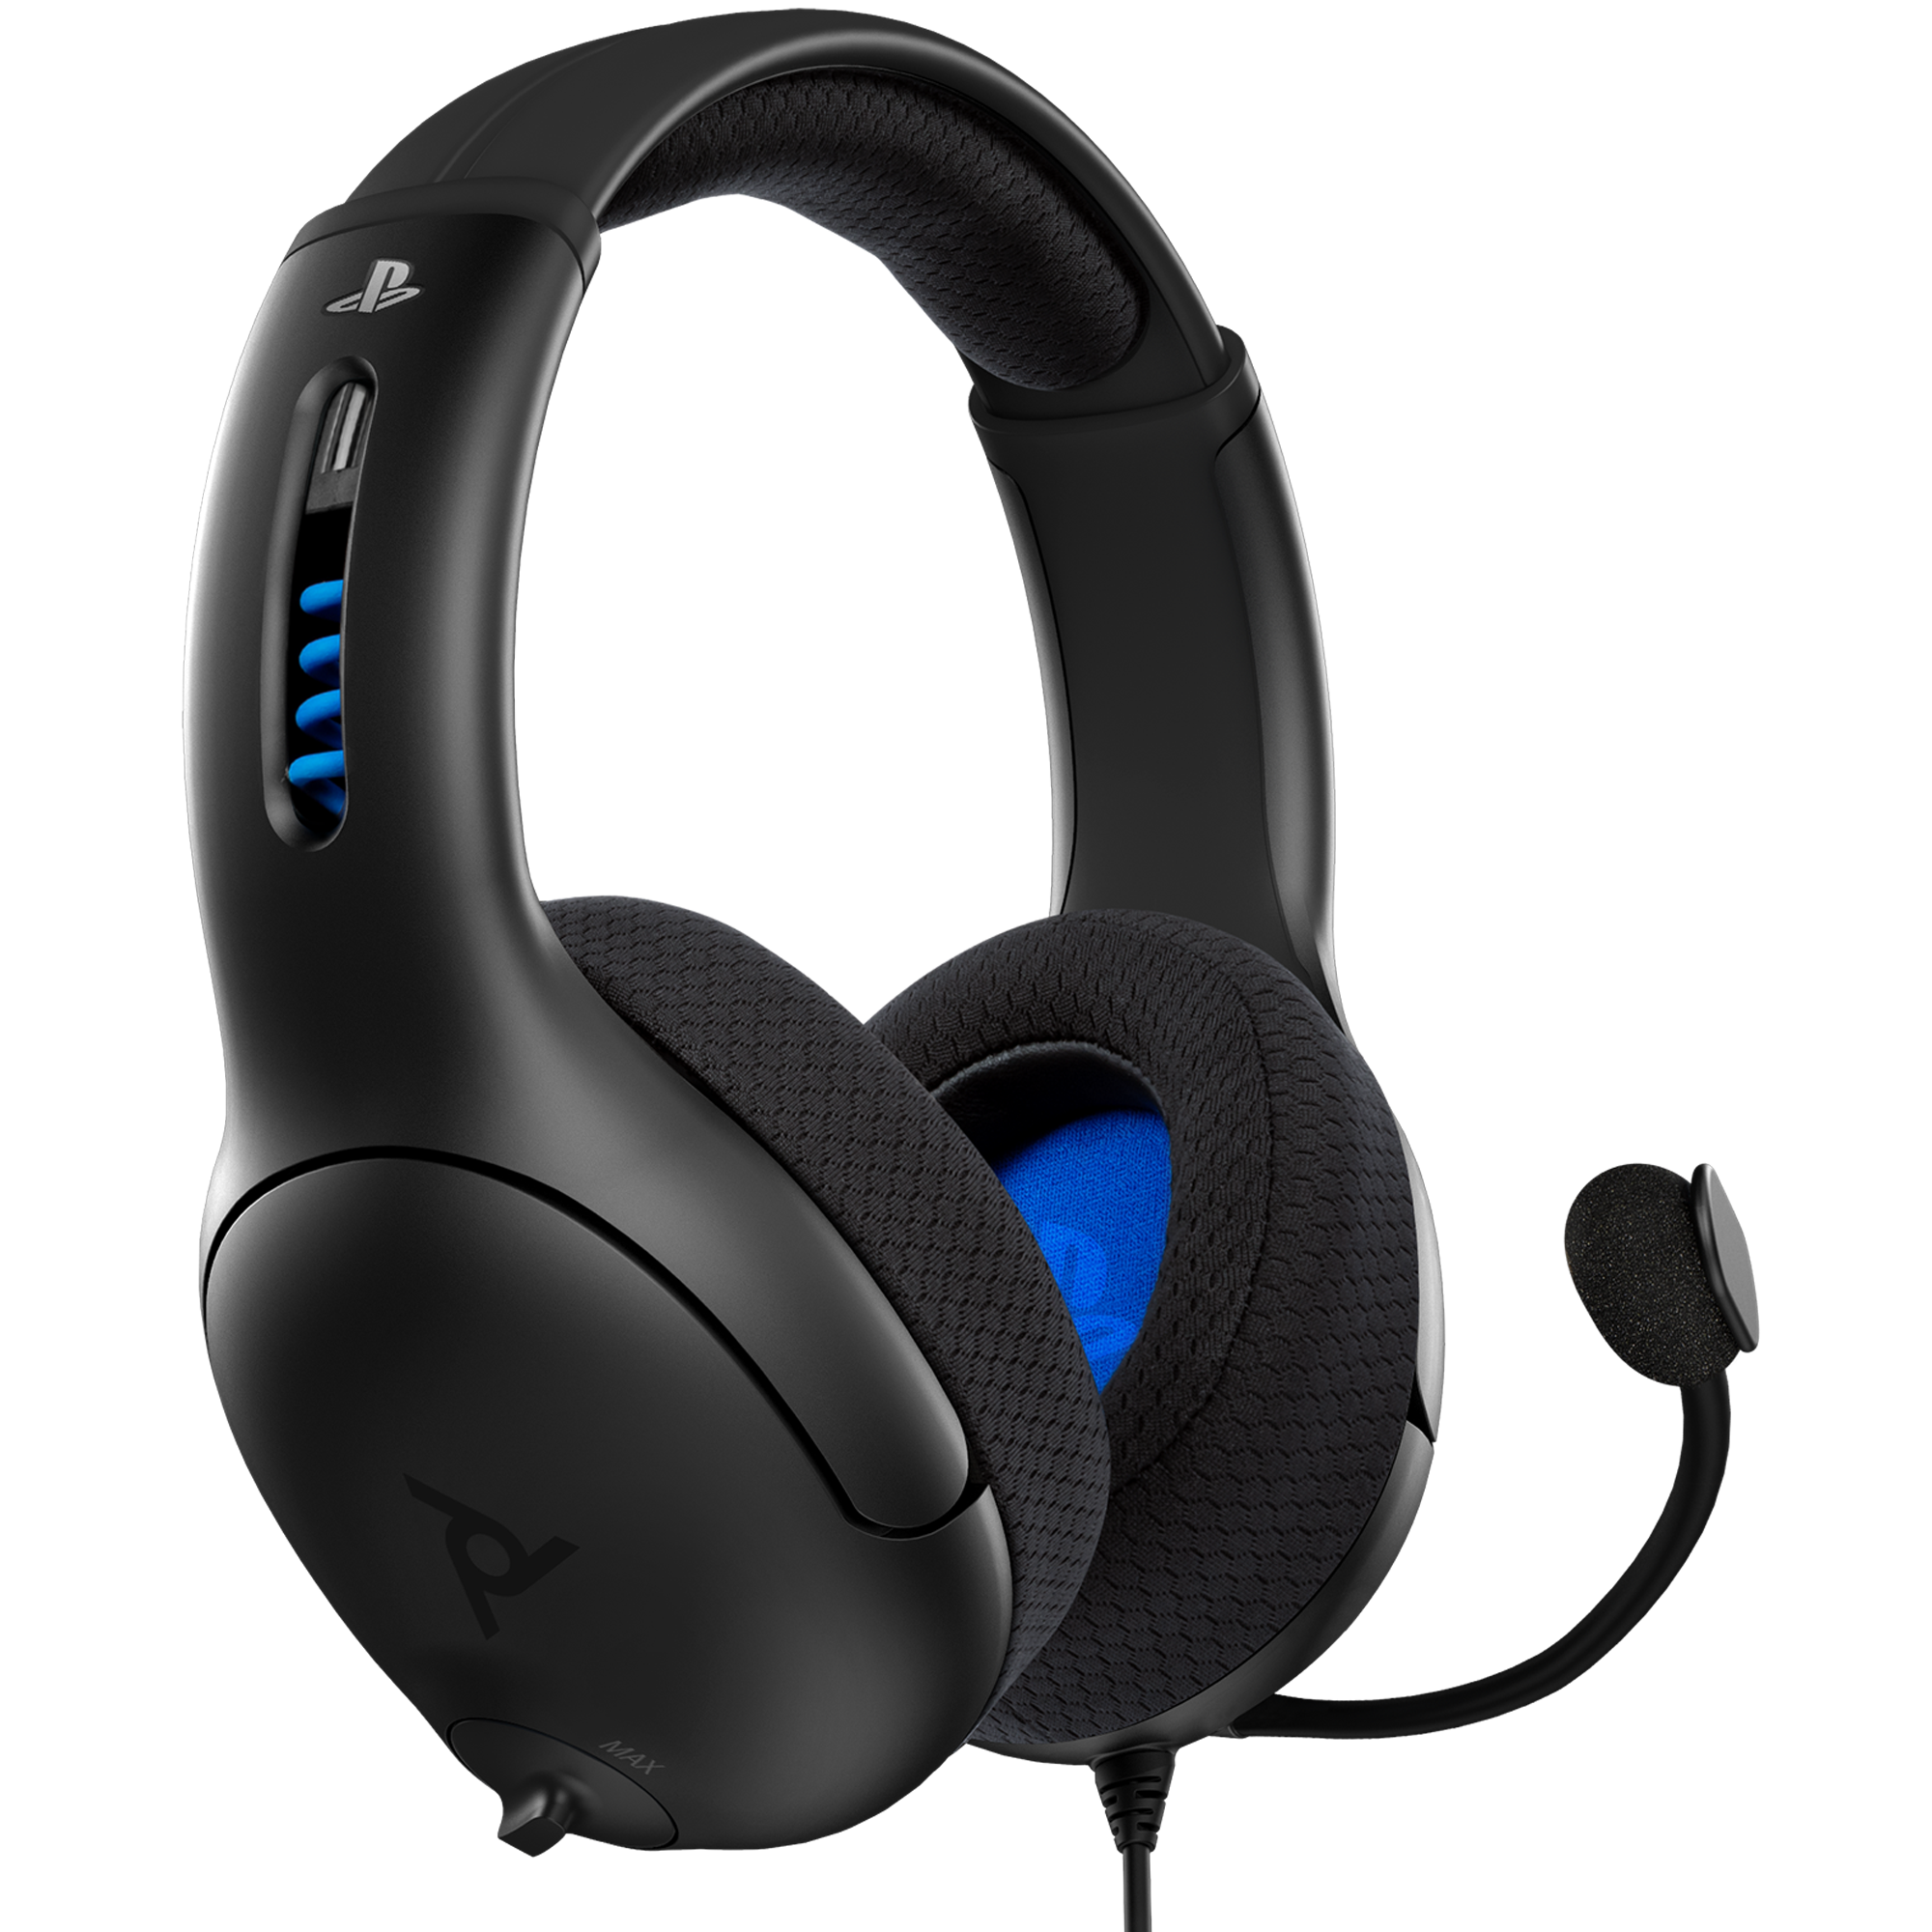 LVL50 Wireless Gaming Headset for Xbox Un-Boxing & Review